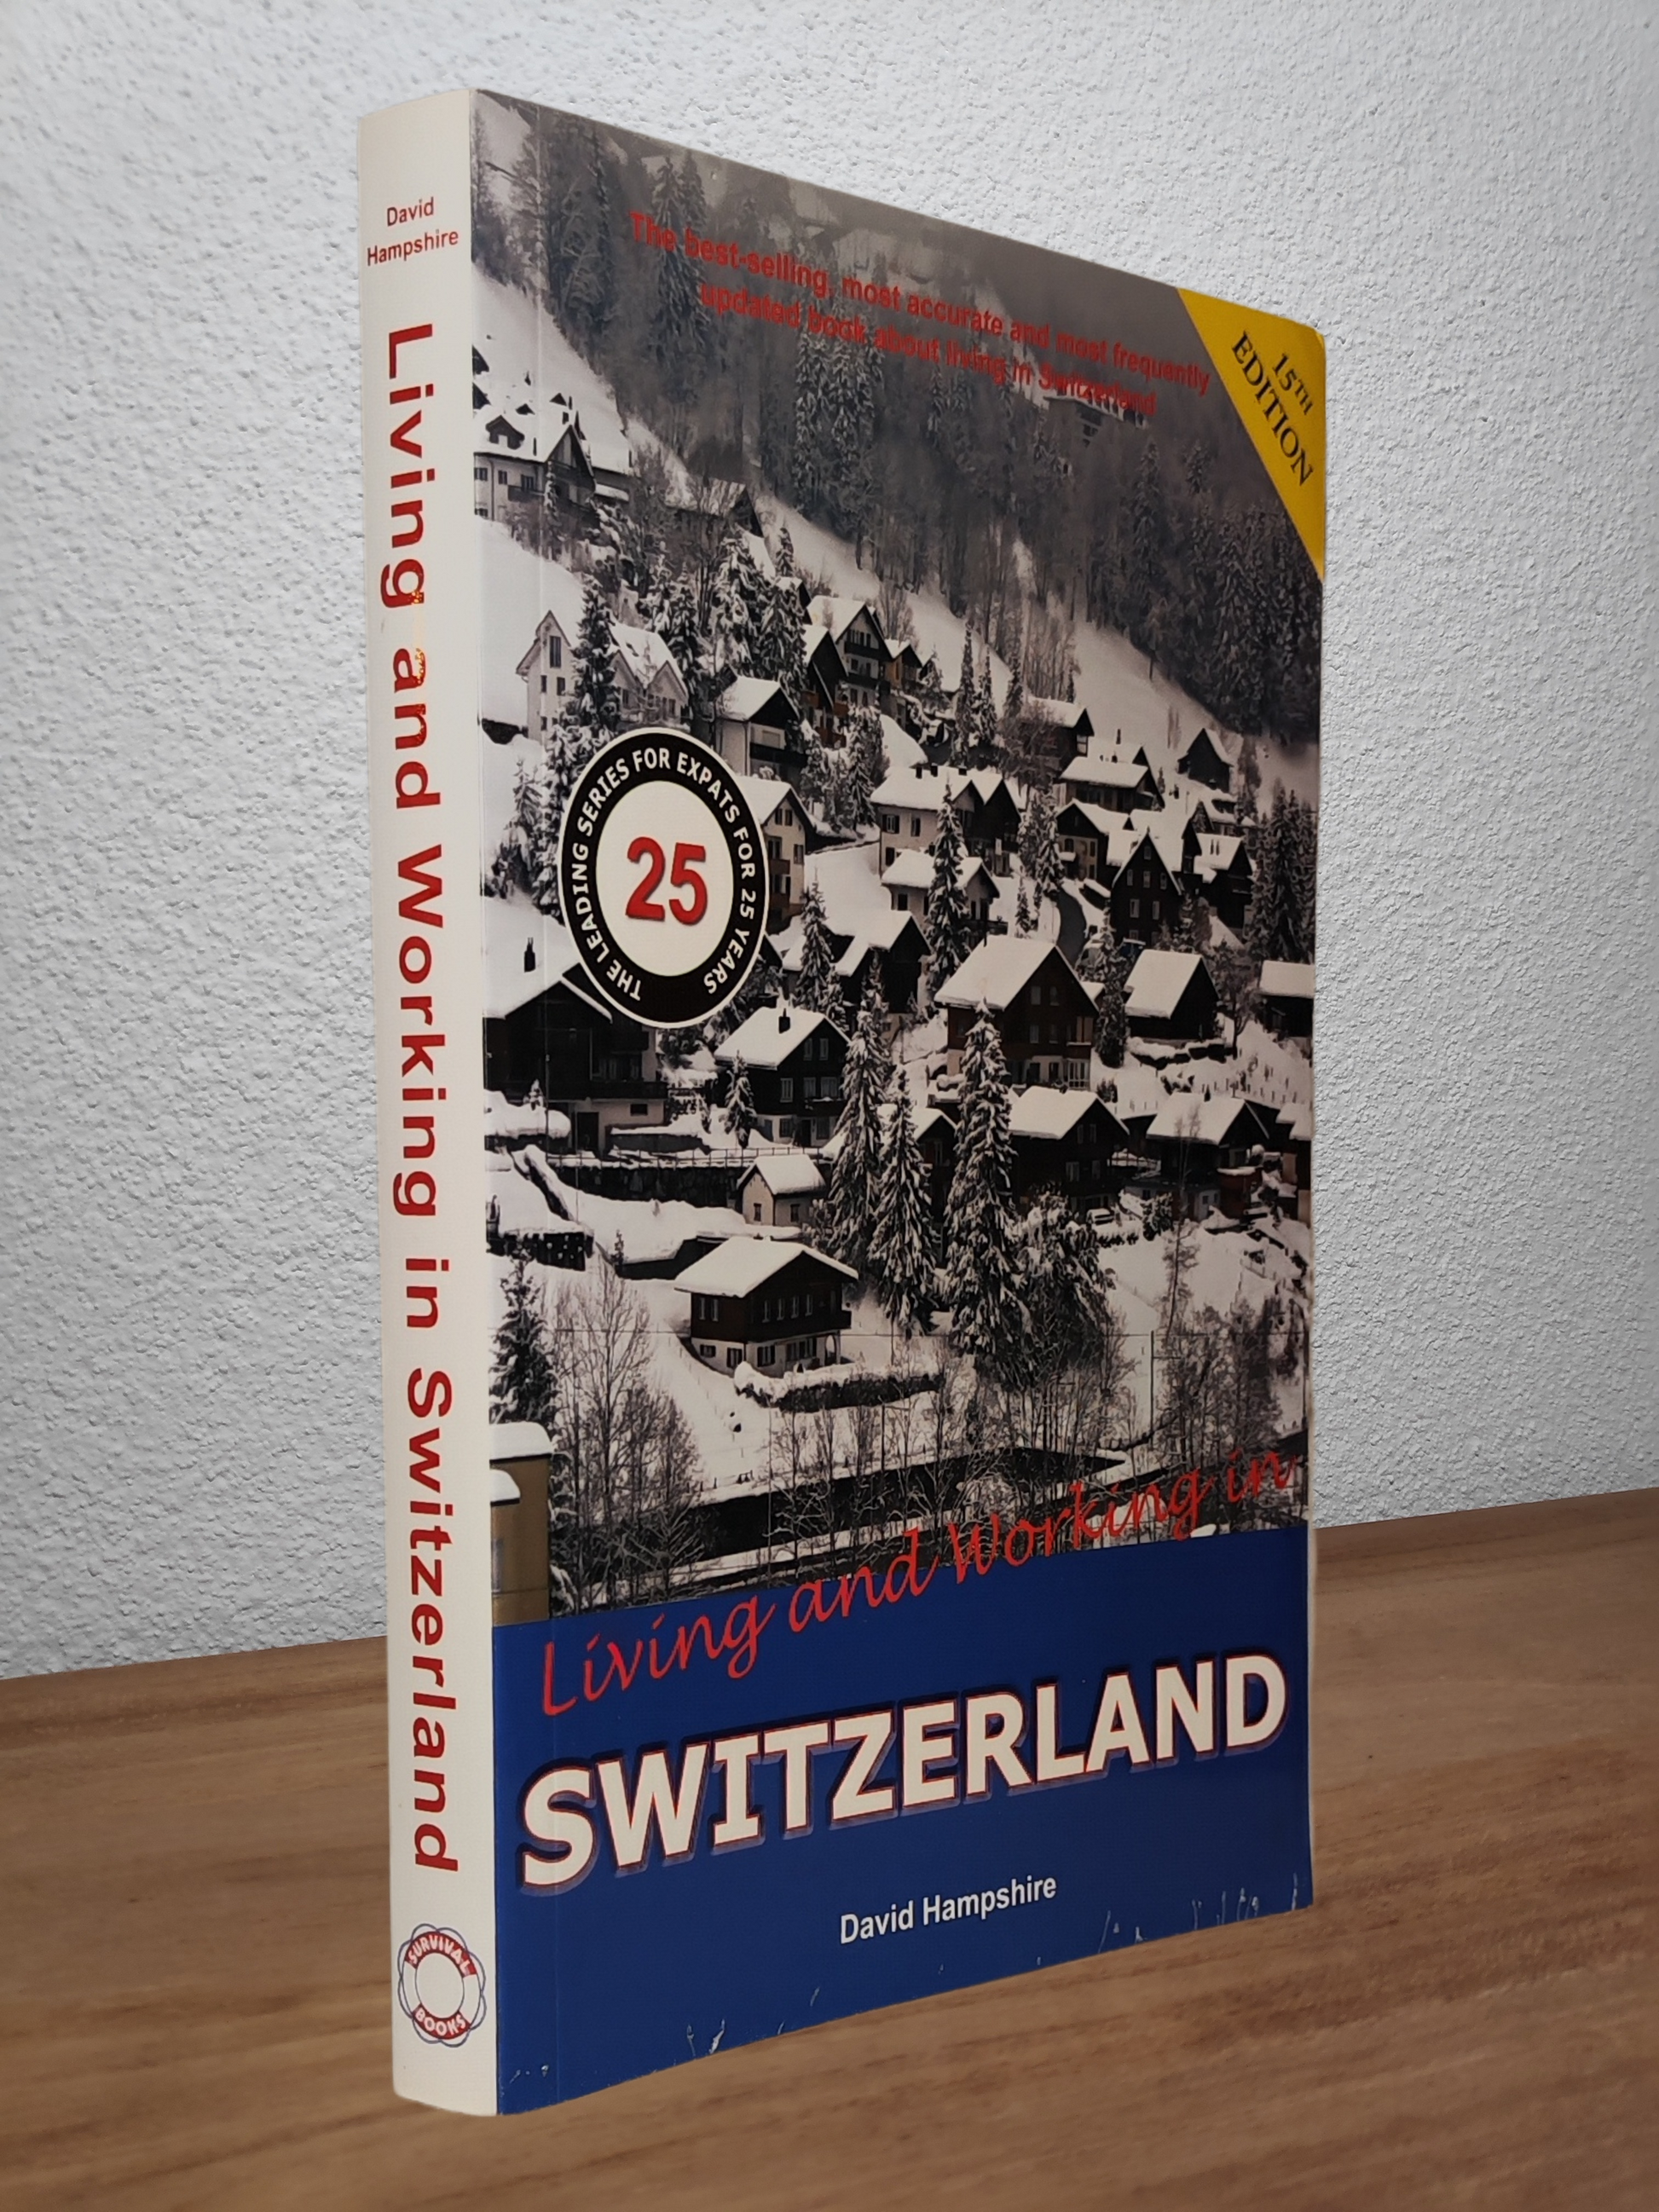 David Hampshire - Living and Working in Switzerland   - Second-hand english book to deliver in Zurich & Switzerland